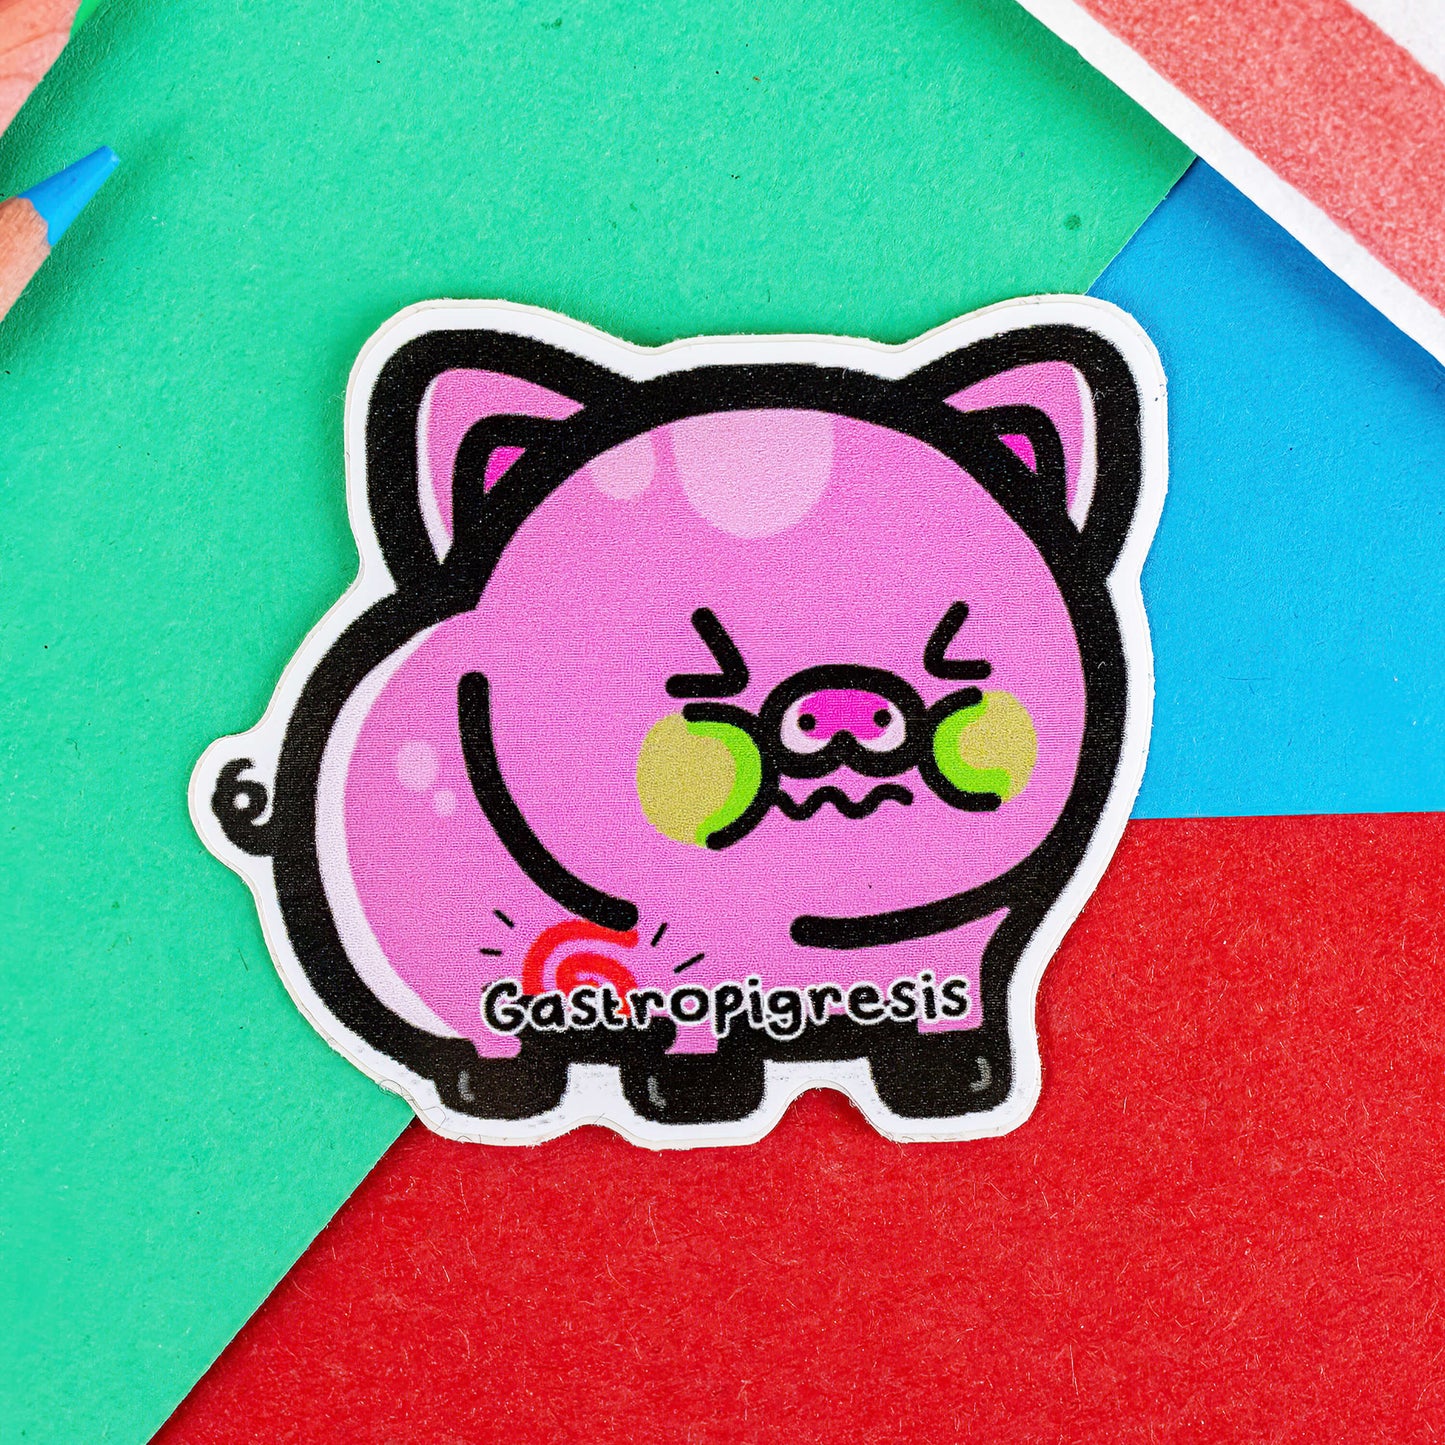 A sticker of a very pink sick looking pig with green cheeks  a swirly red tummy and Gastropigresis written across its middle. It is on a red, blue and green background with coloured pencils to one side and a stripy paper bag.